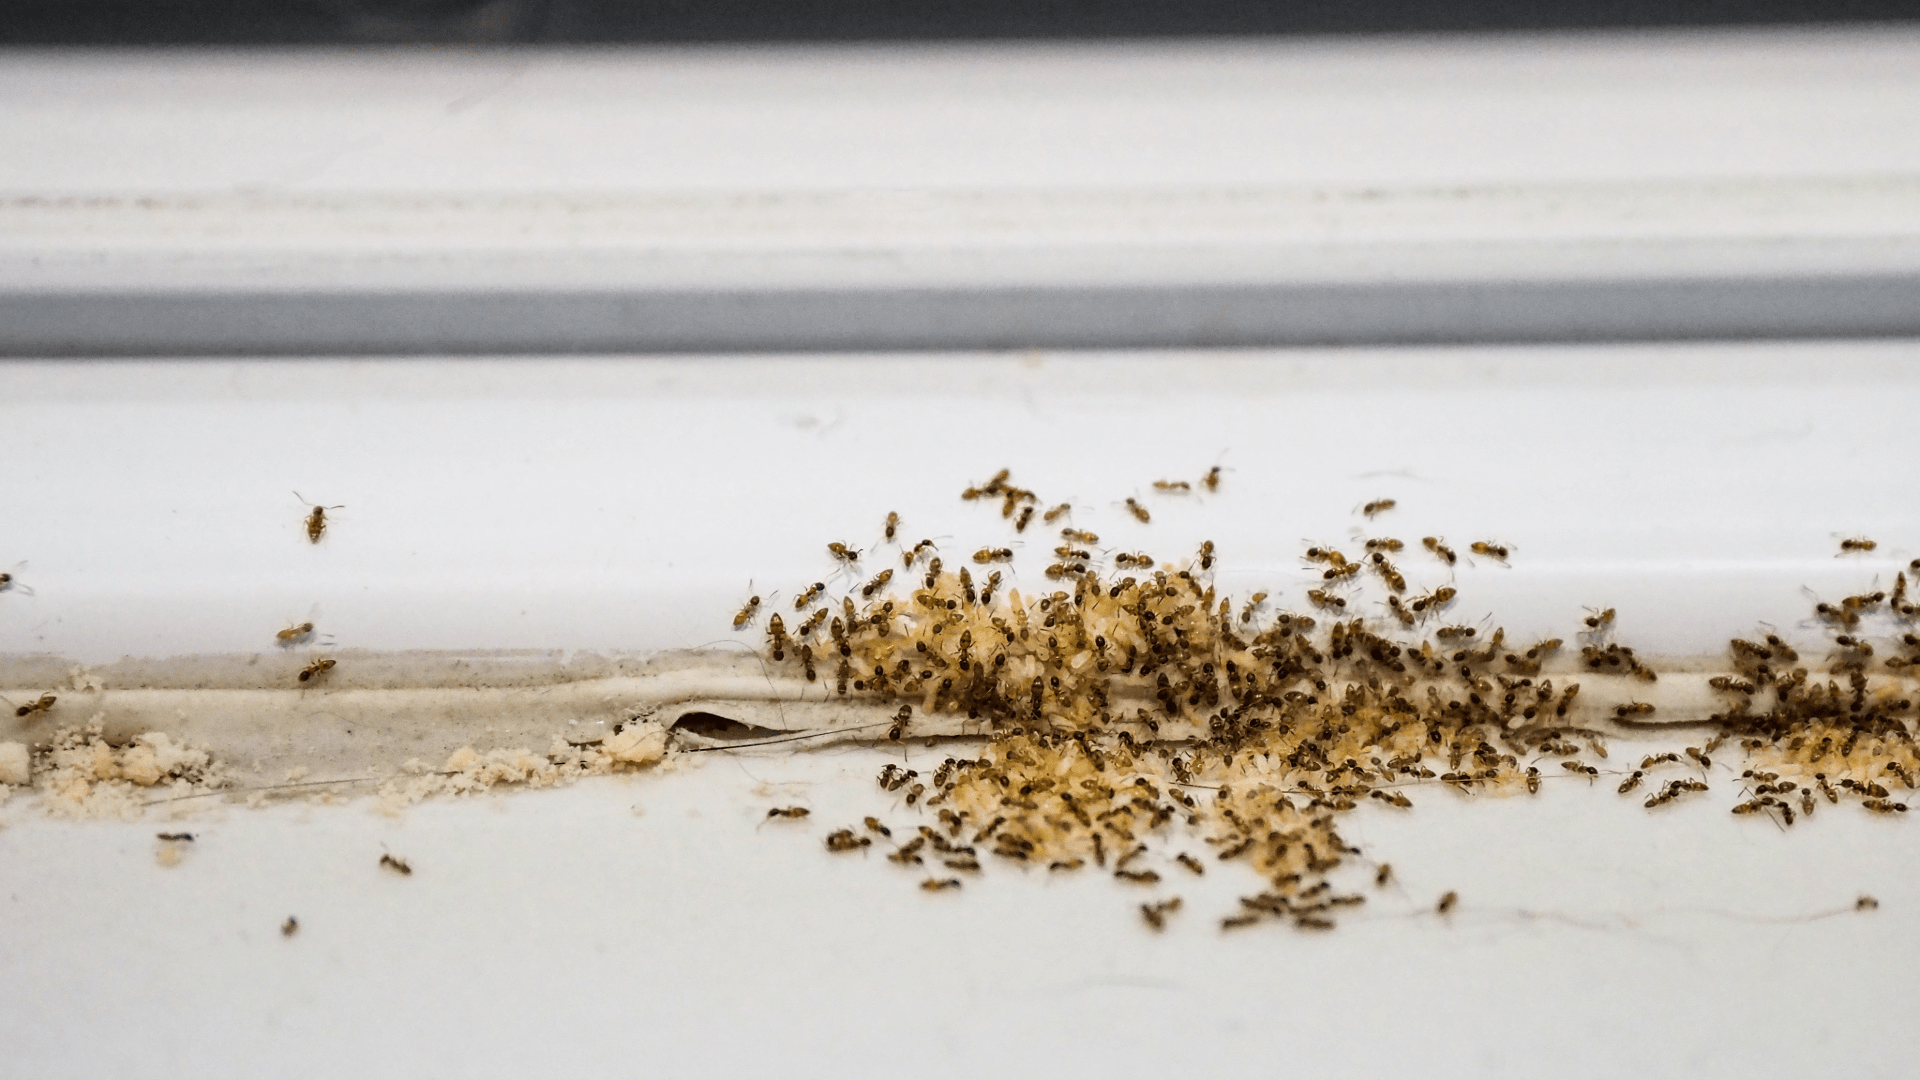 Ant Prevention: These ants are found eating food near a baseboard, don't let this be you.